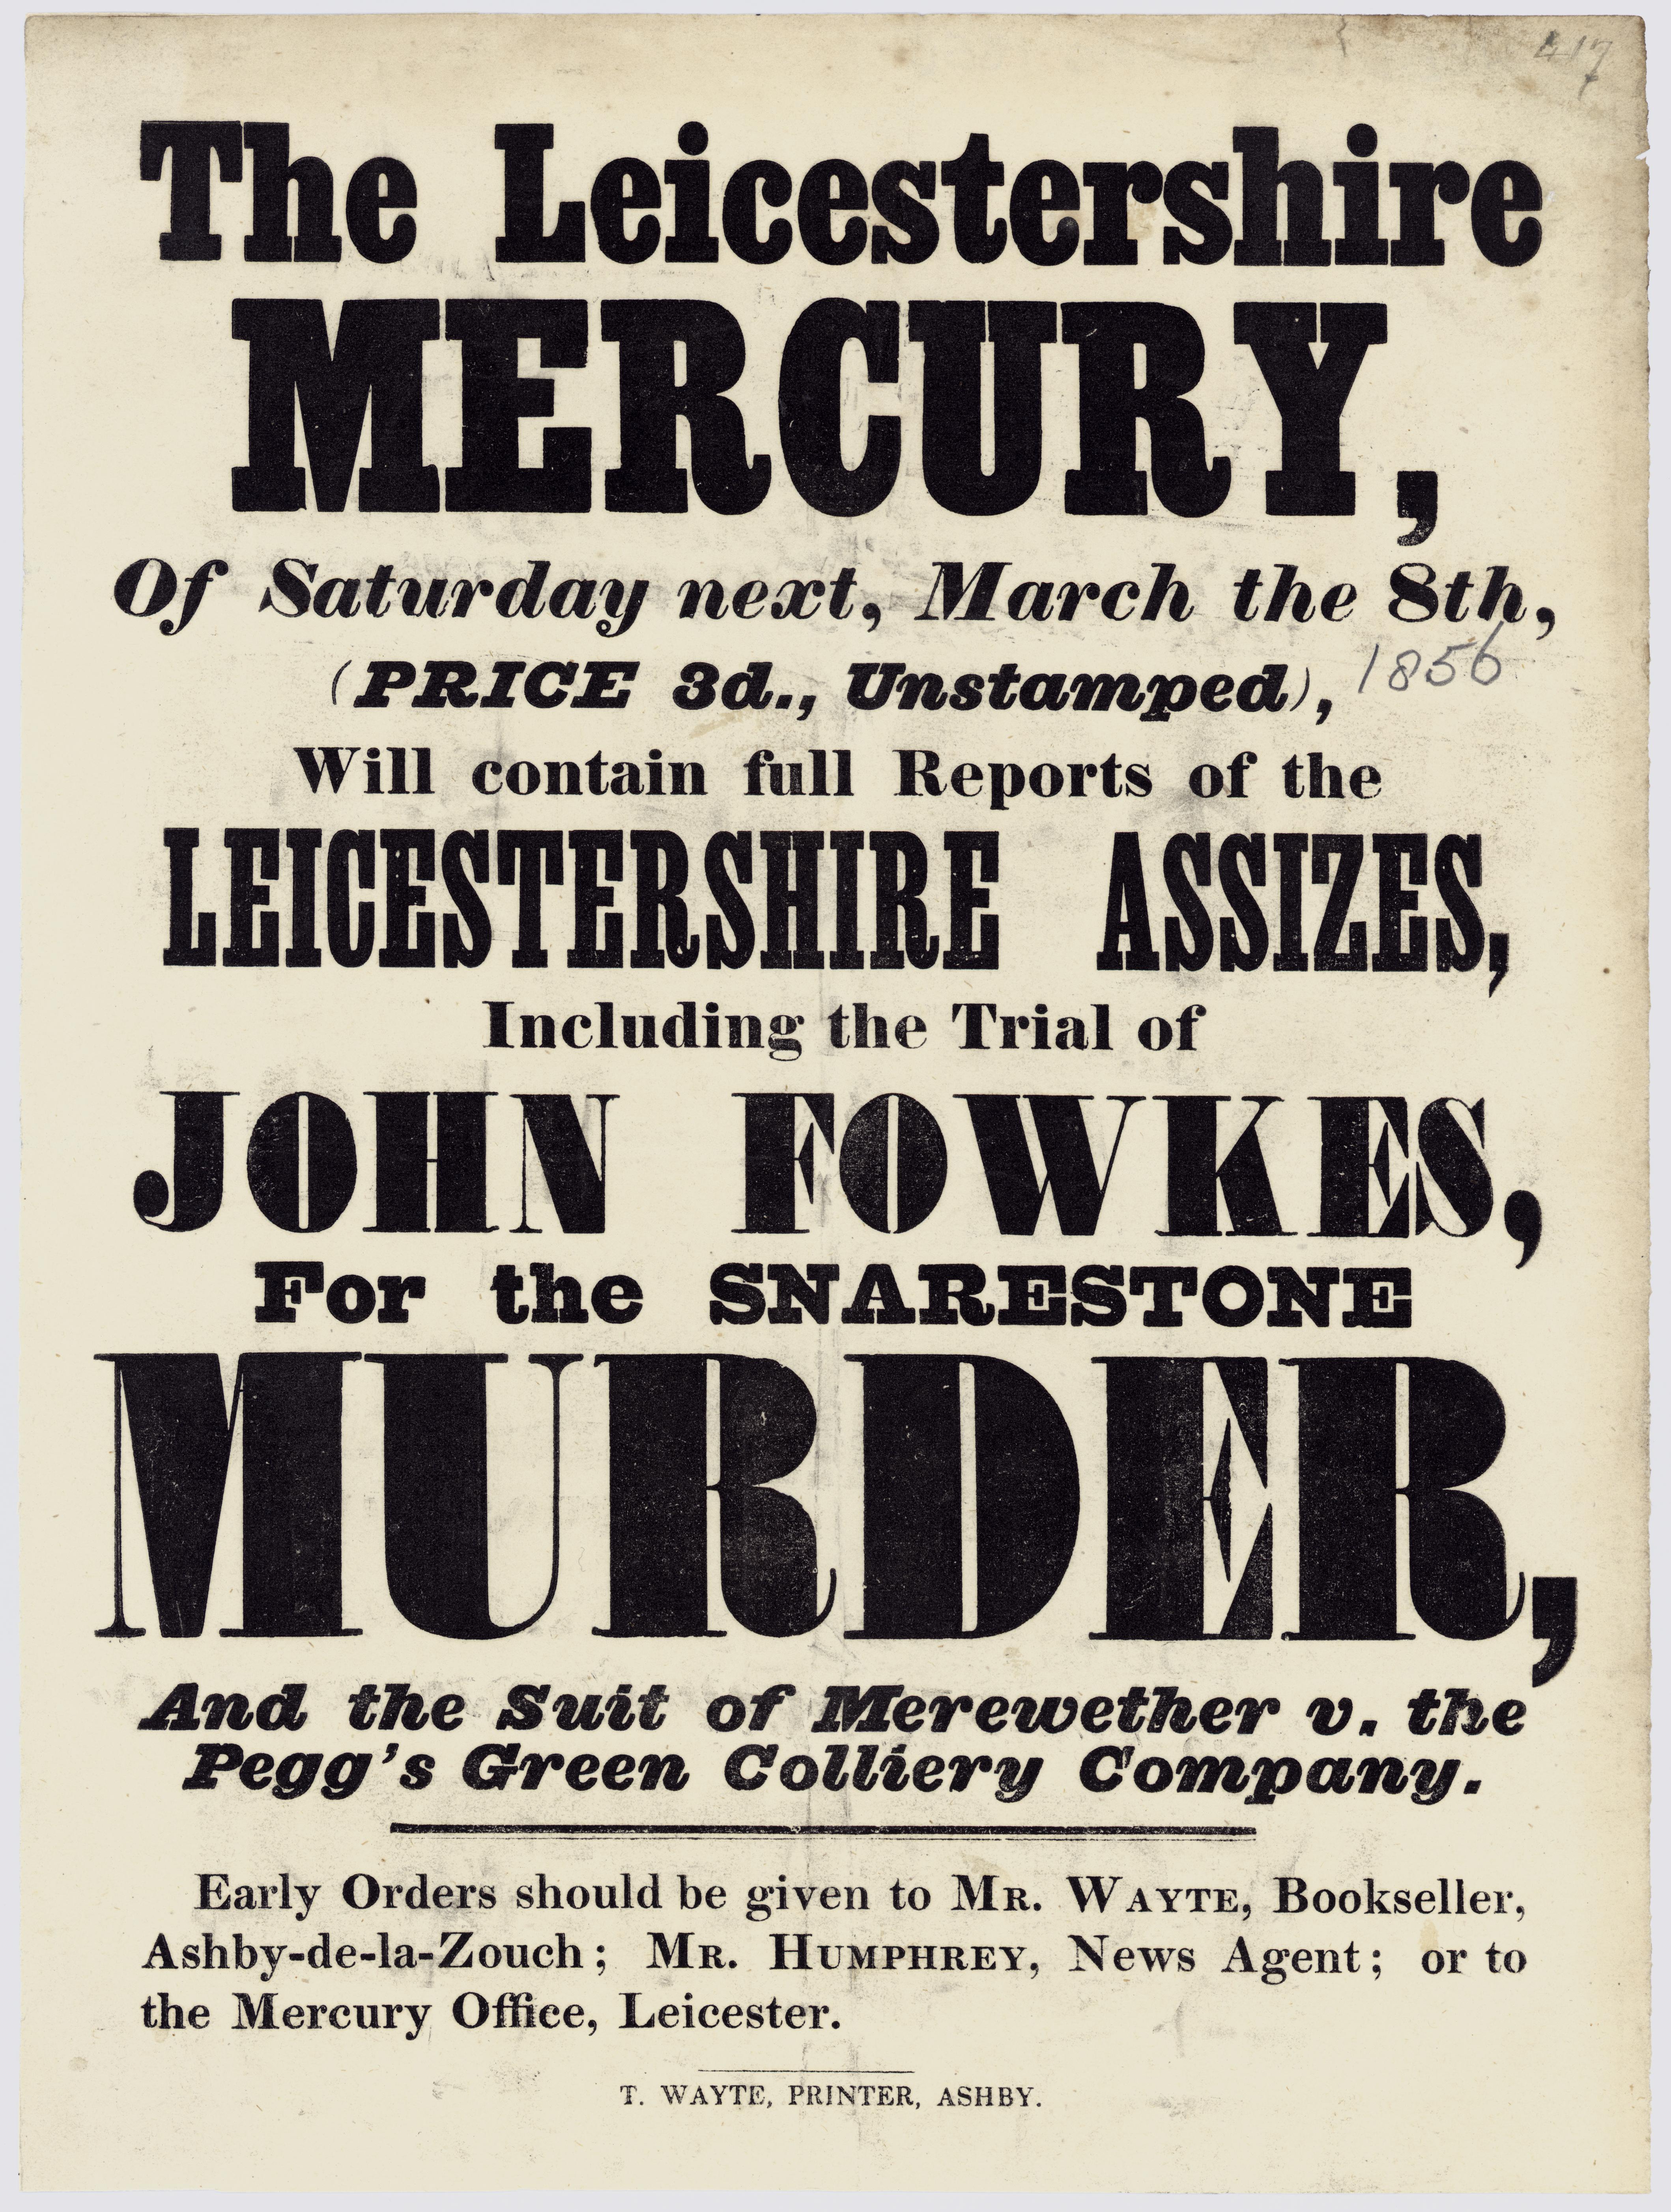 The Leicestershire Mercury, of Saturday next, March the 8th (Price 3d., unstamped) will contain full reports of the Leicestershire Assizes, including the trial of John Fowkes, for the Snarestone Murder, and the suit of Merewether v the Pegg's Green Collie